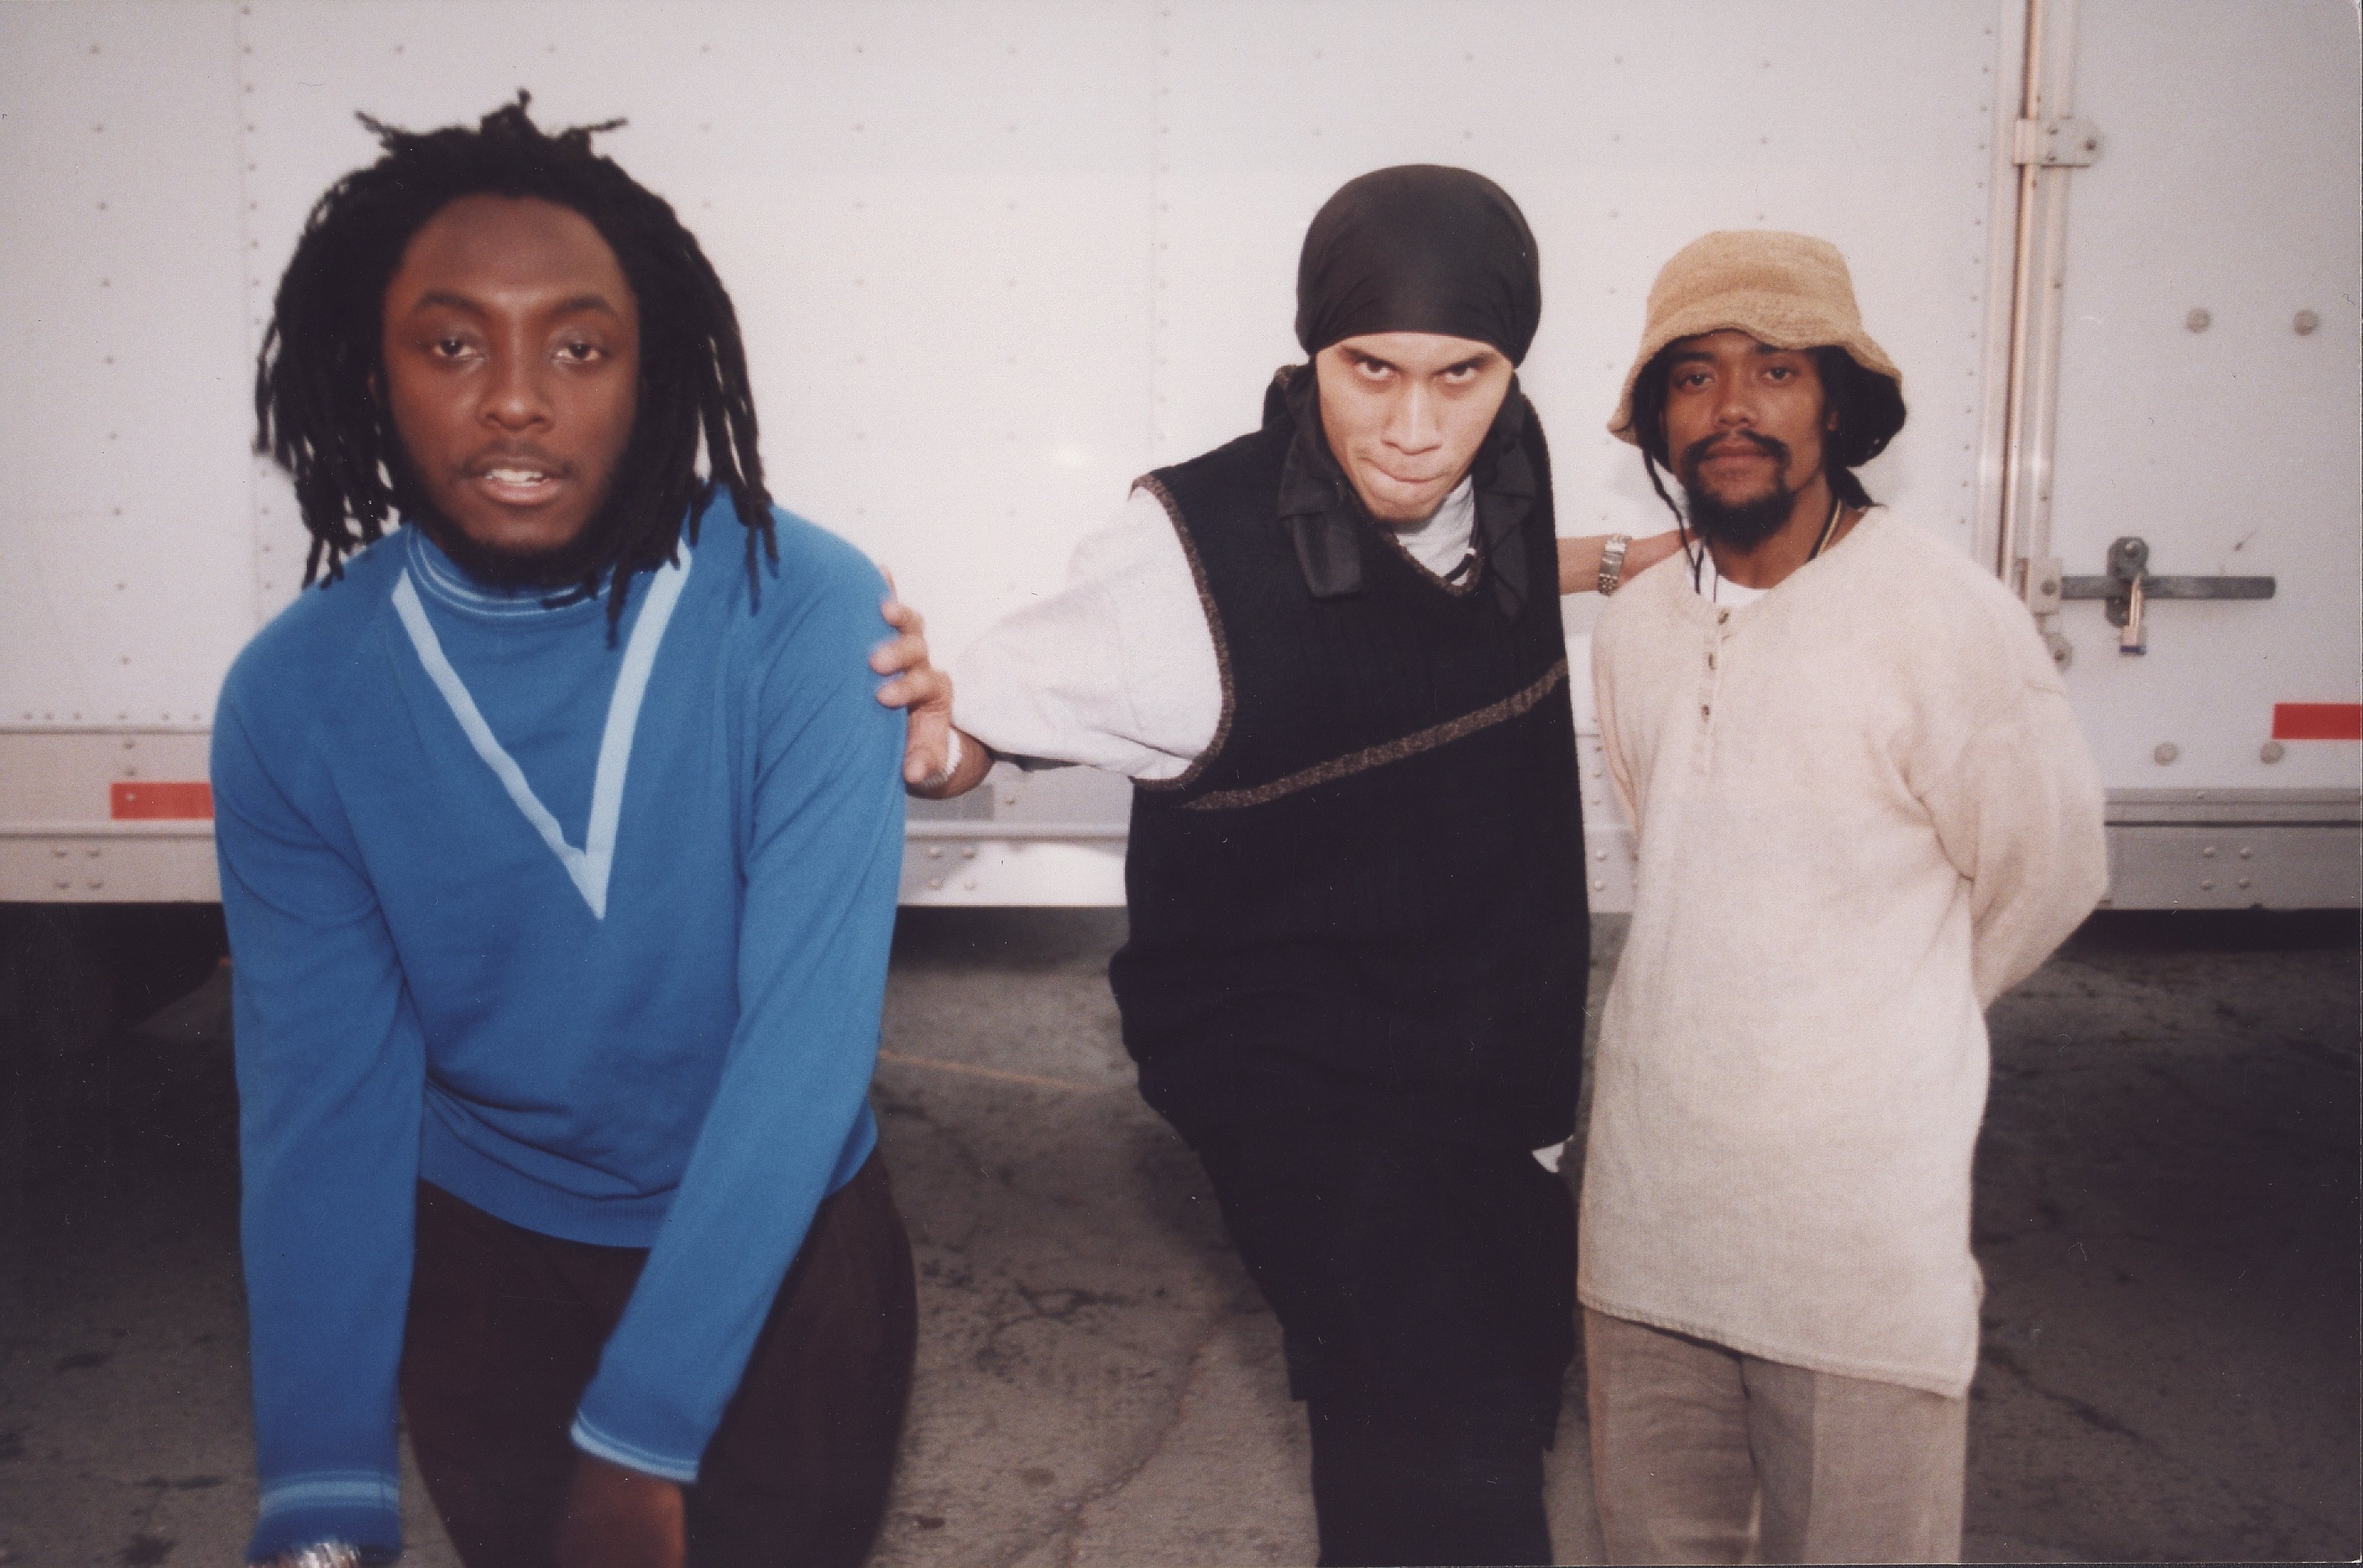 The Black Eyed Peas' Will.i.am, Taboo, and apl.de.ap
